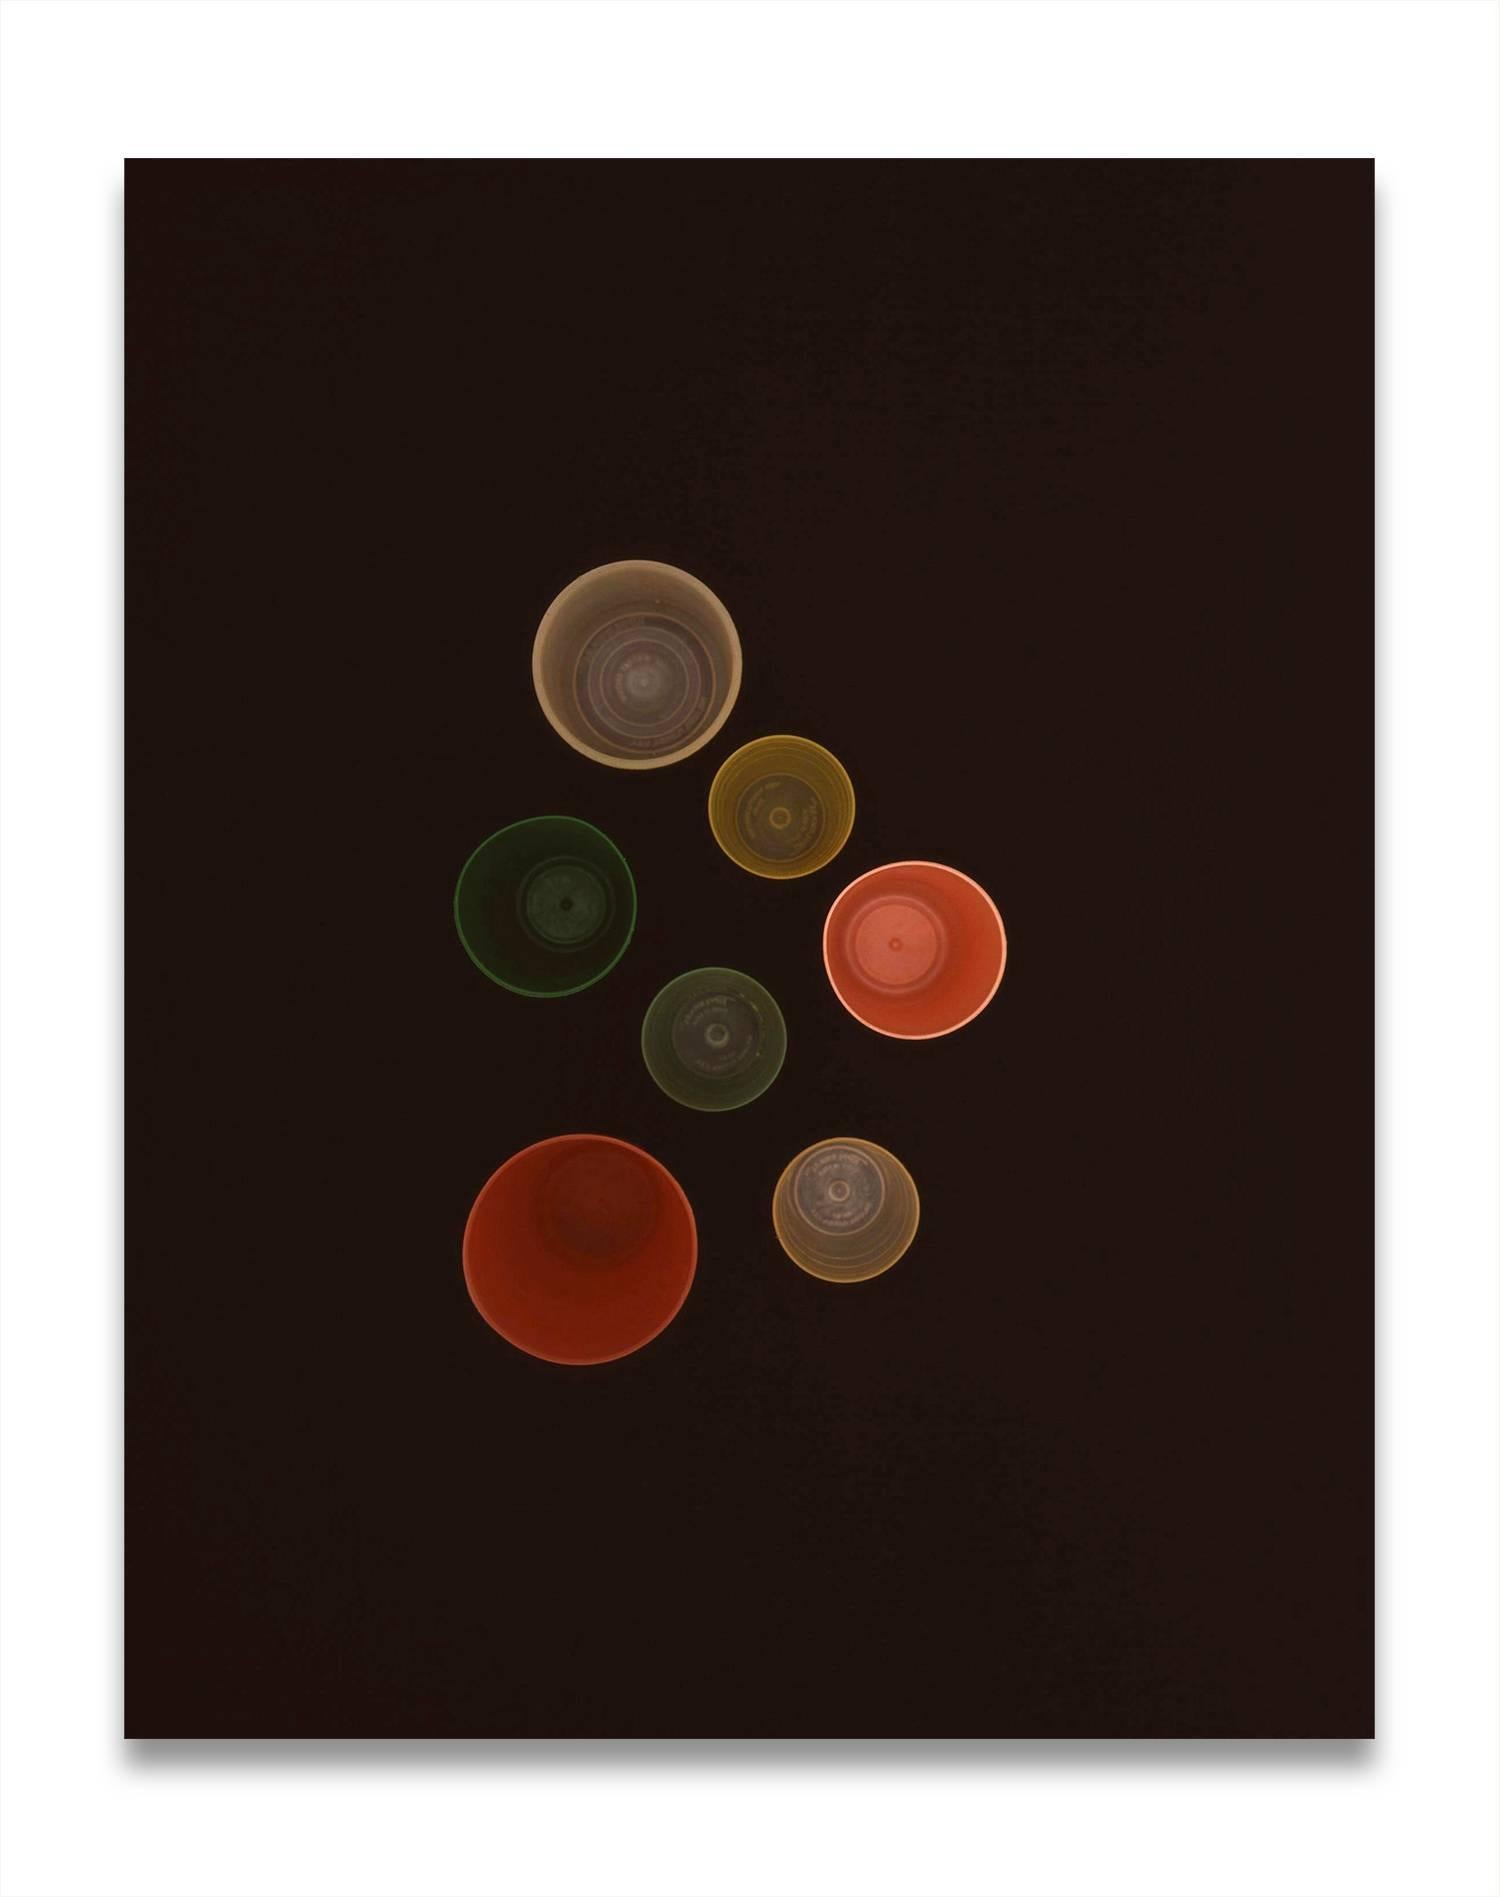 Untitled 110/5 (Abstract Photography)

C print. Unframed.

Richard Caldicott is most well known for this earlier work series which used Tupperware containers as the subject for his photographs.

As he describes: "Tupperware works used two colour